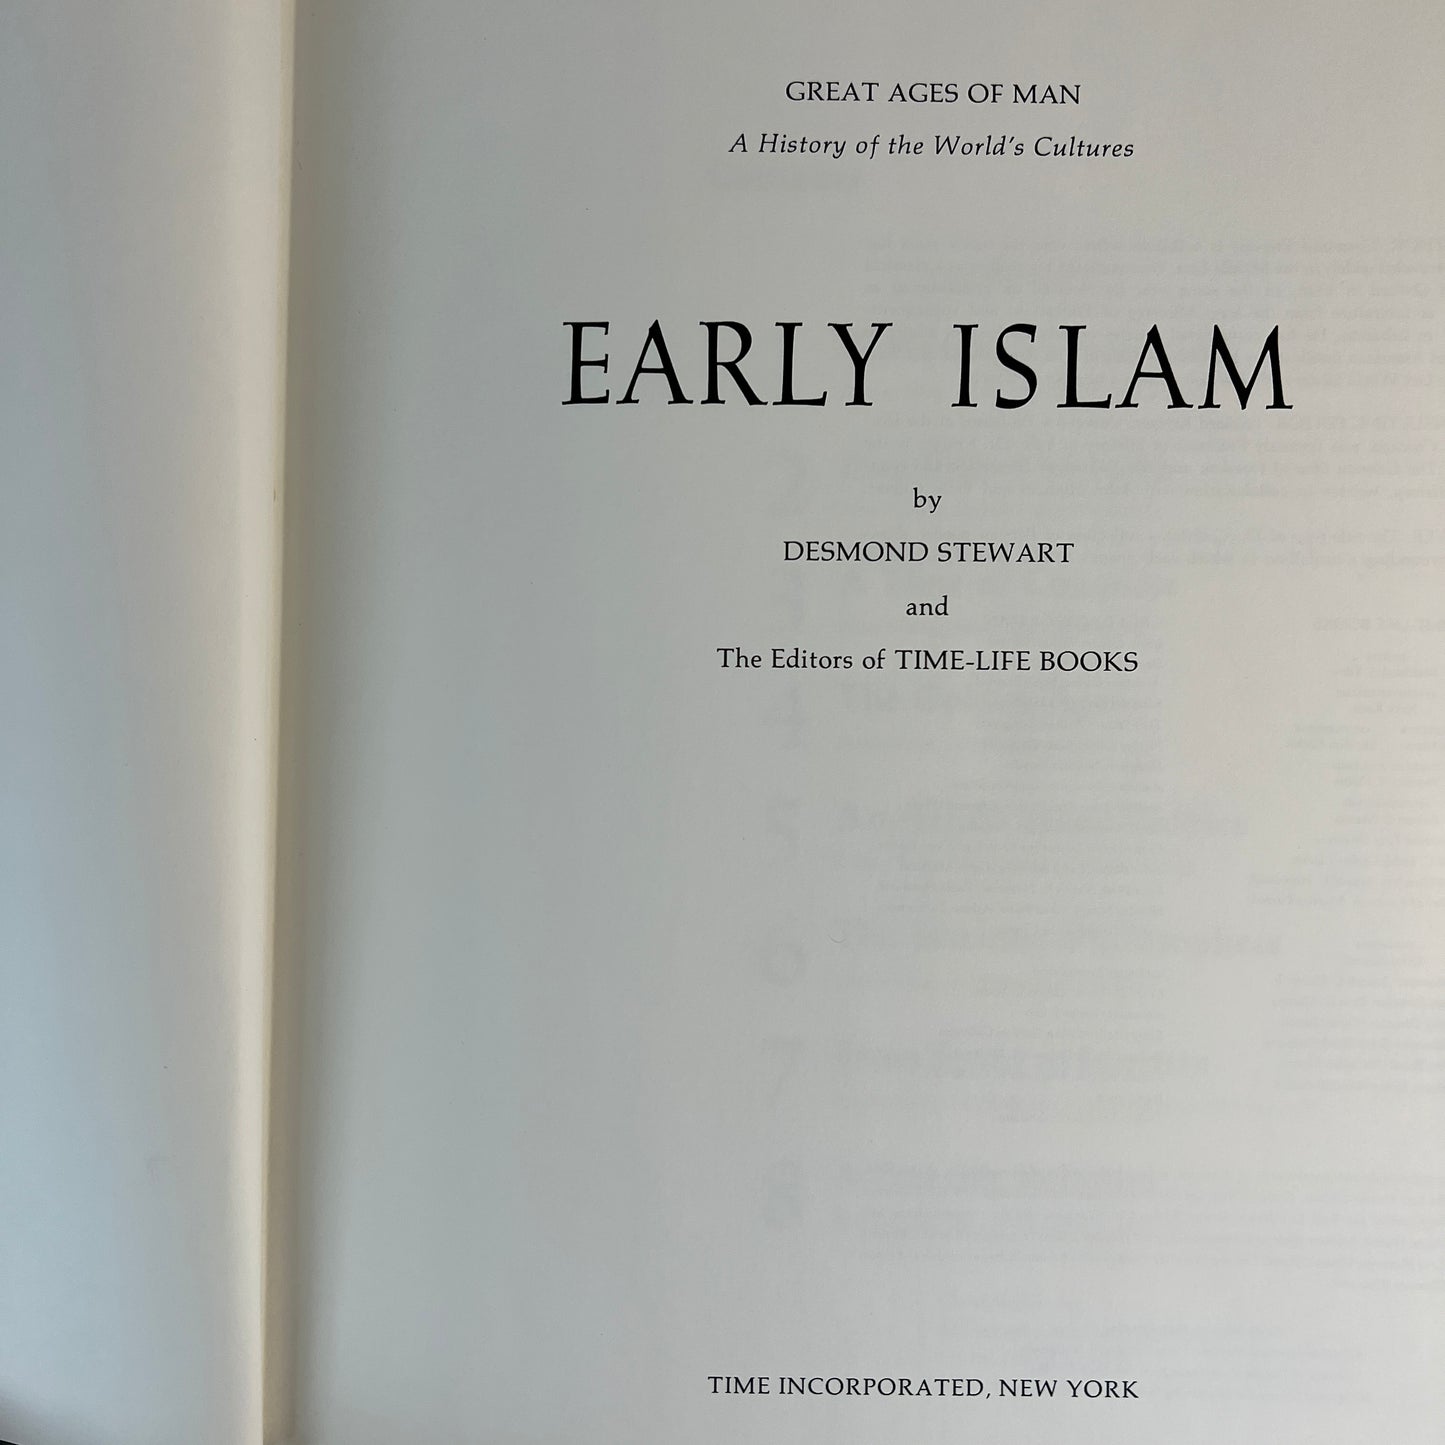 Great Ages of Man: Early Islam